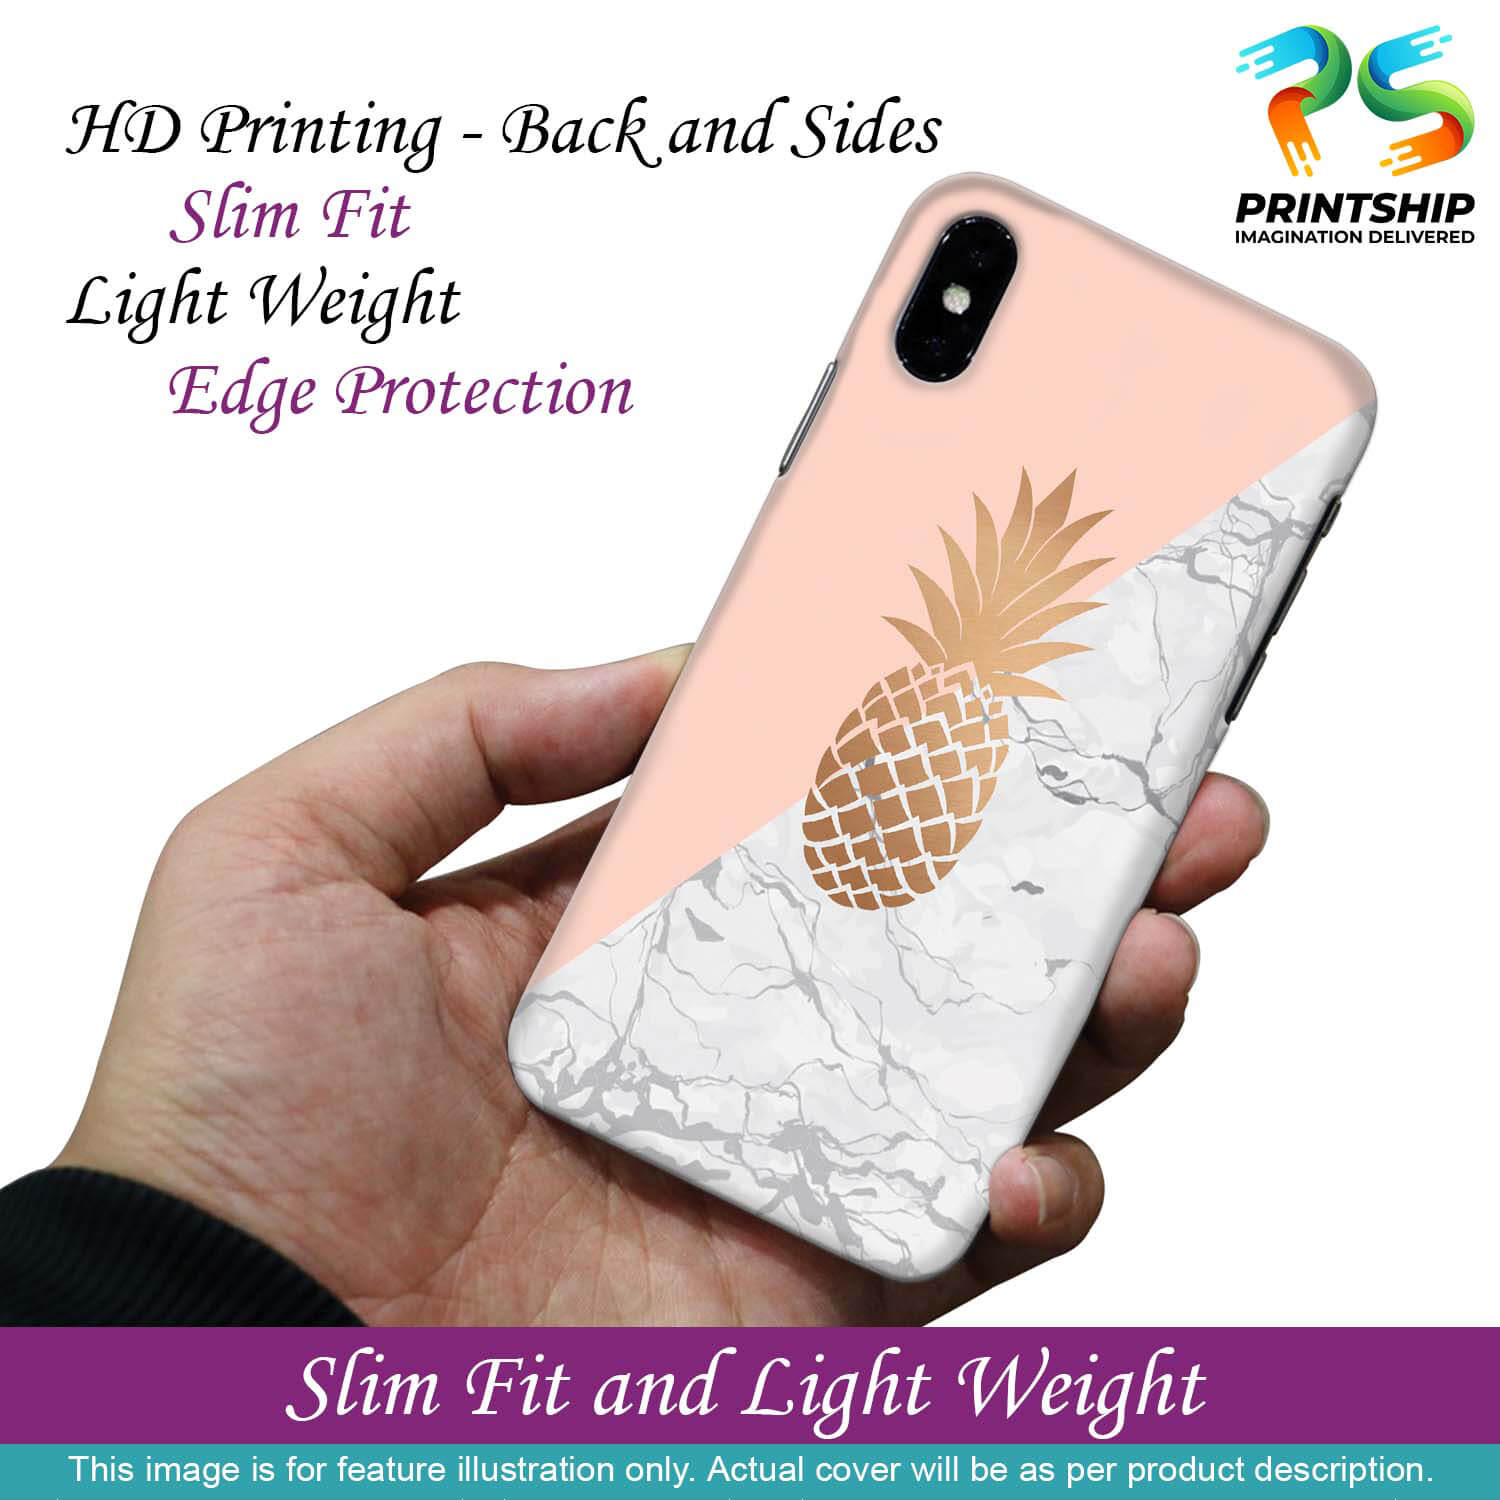 PS1330-Pineapple Marble Back Cover for Realme Narzo 30 Pro